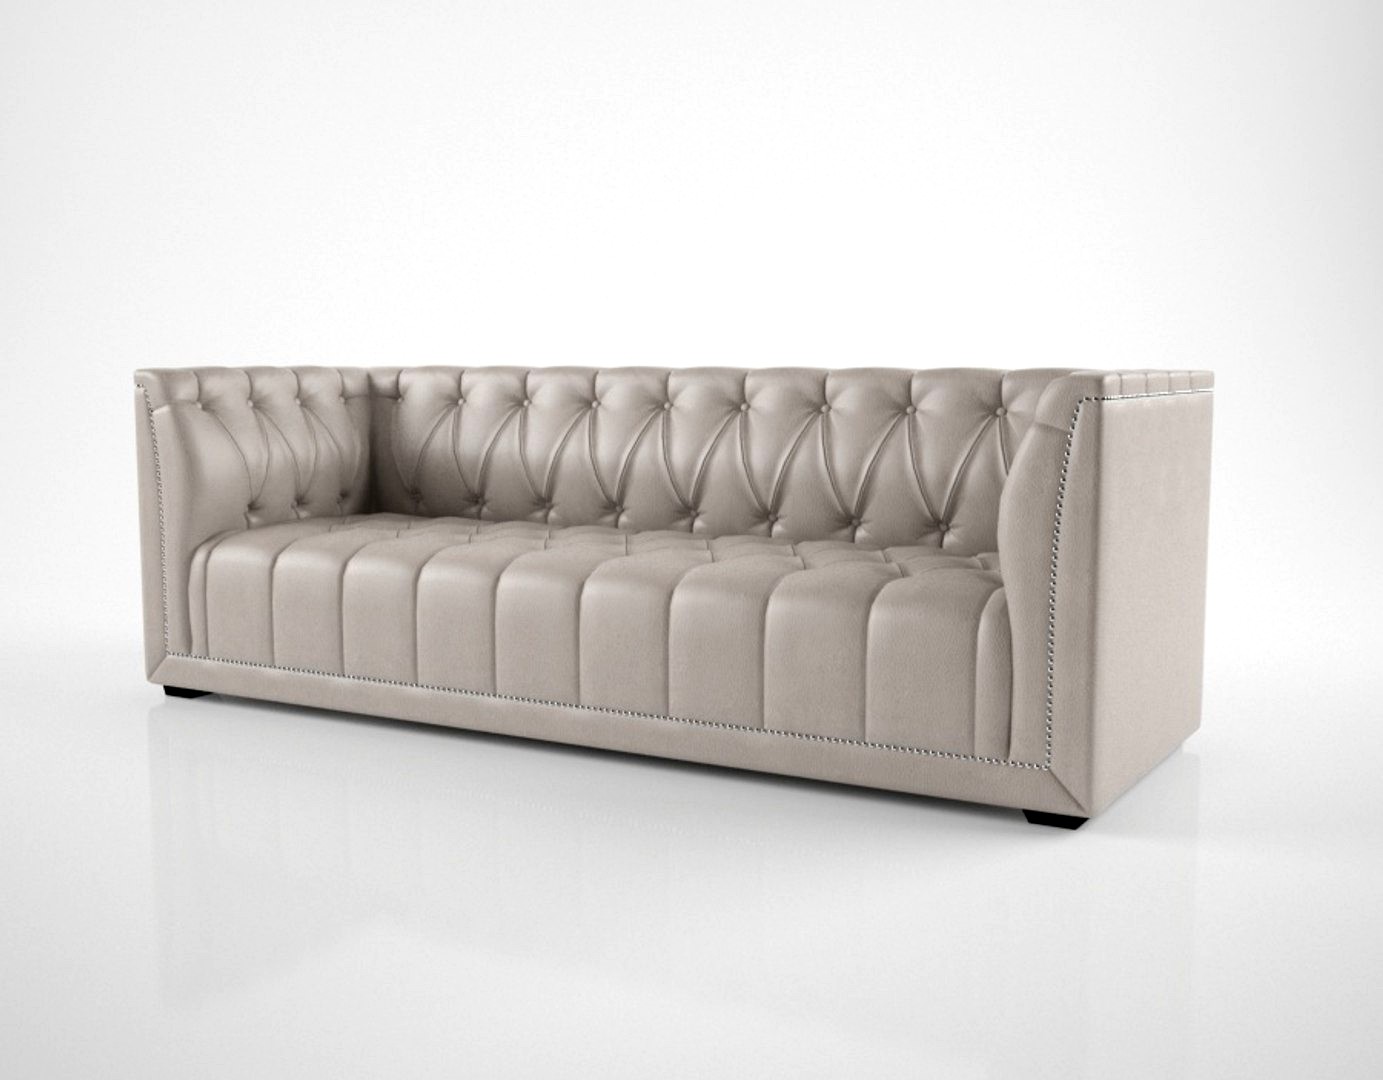 The Sofa and Chair Company Belmont sofa